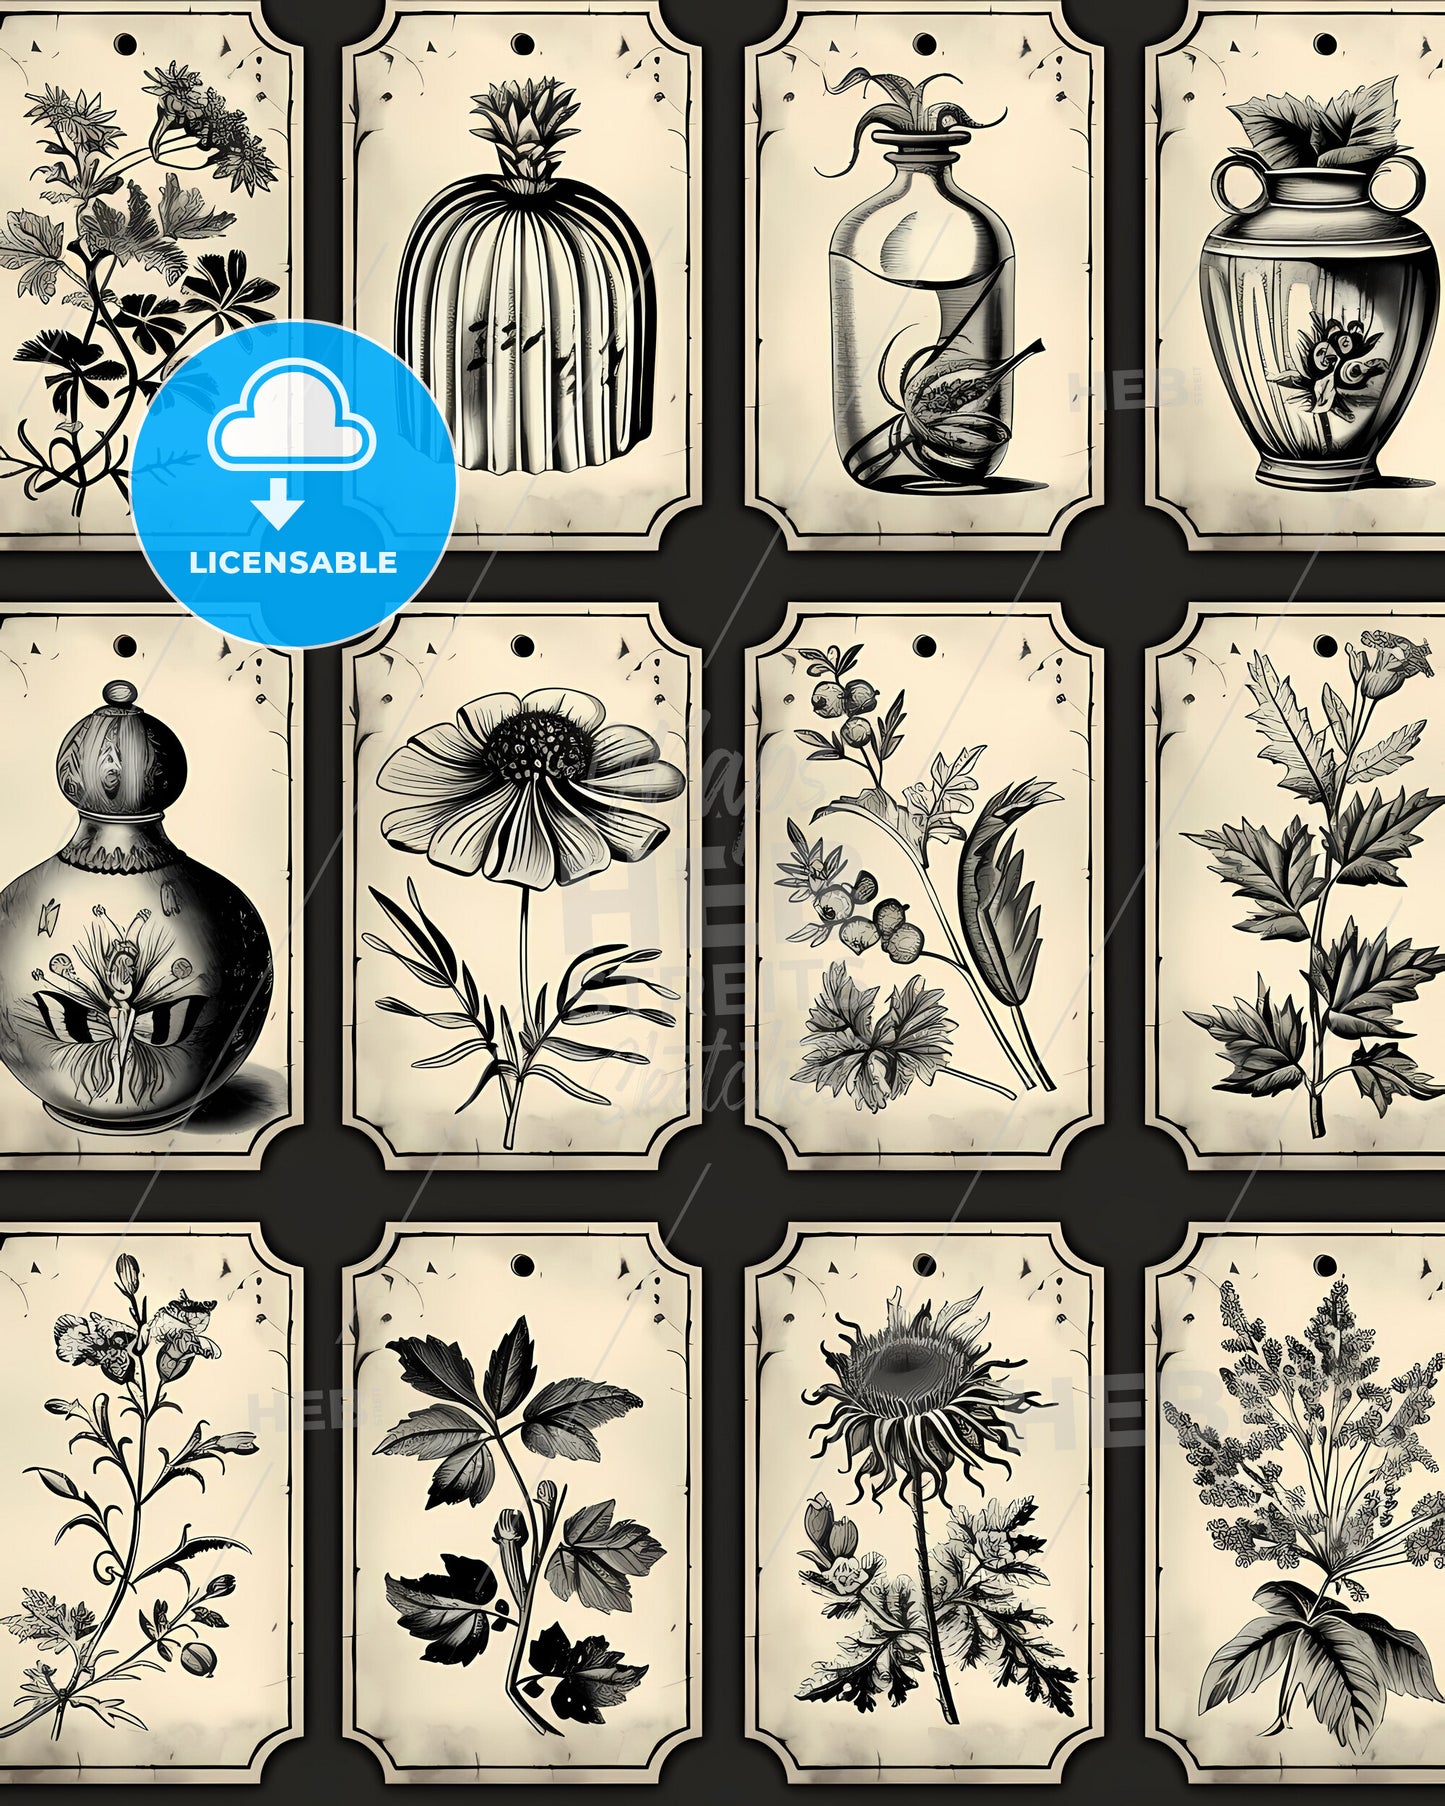 Collection of vintage Halloween plant tag illustrations with black and white tones on cream backgrounds for easy cutout or printing details